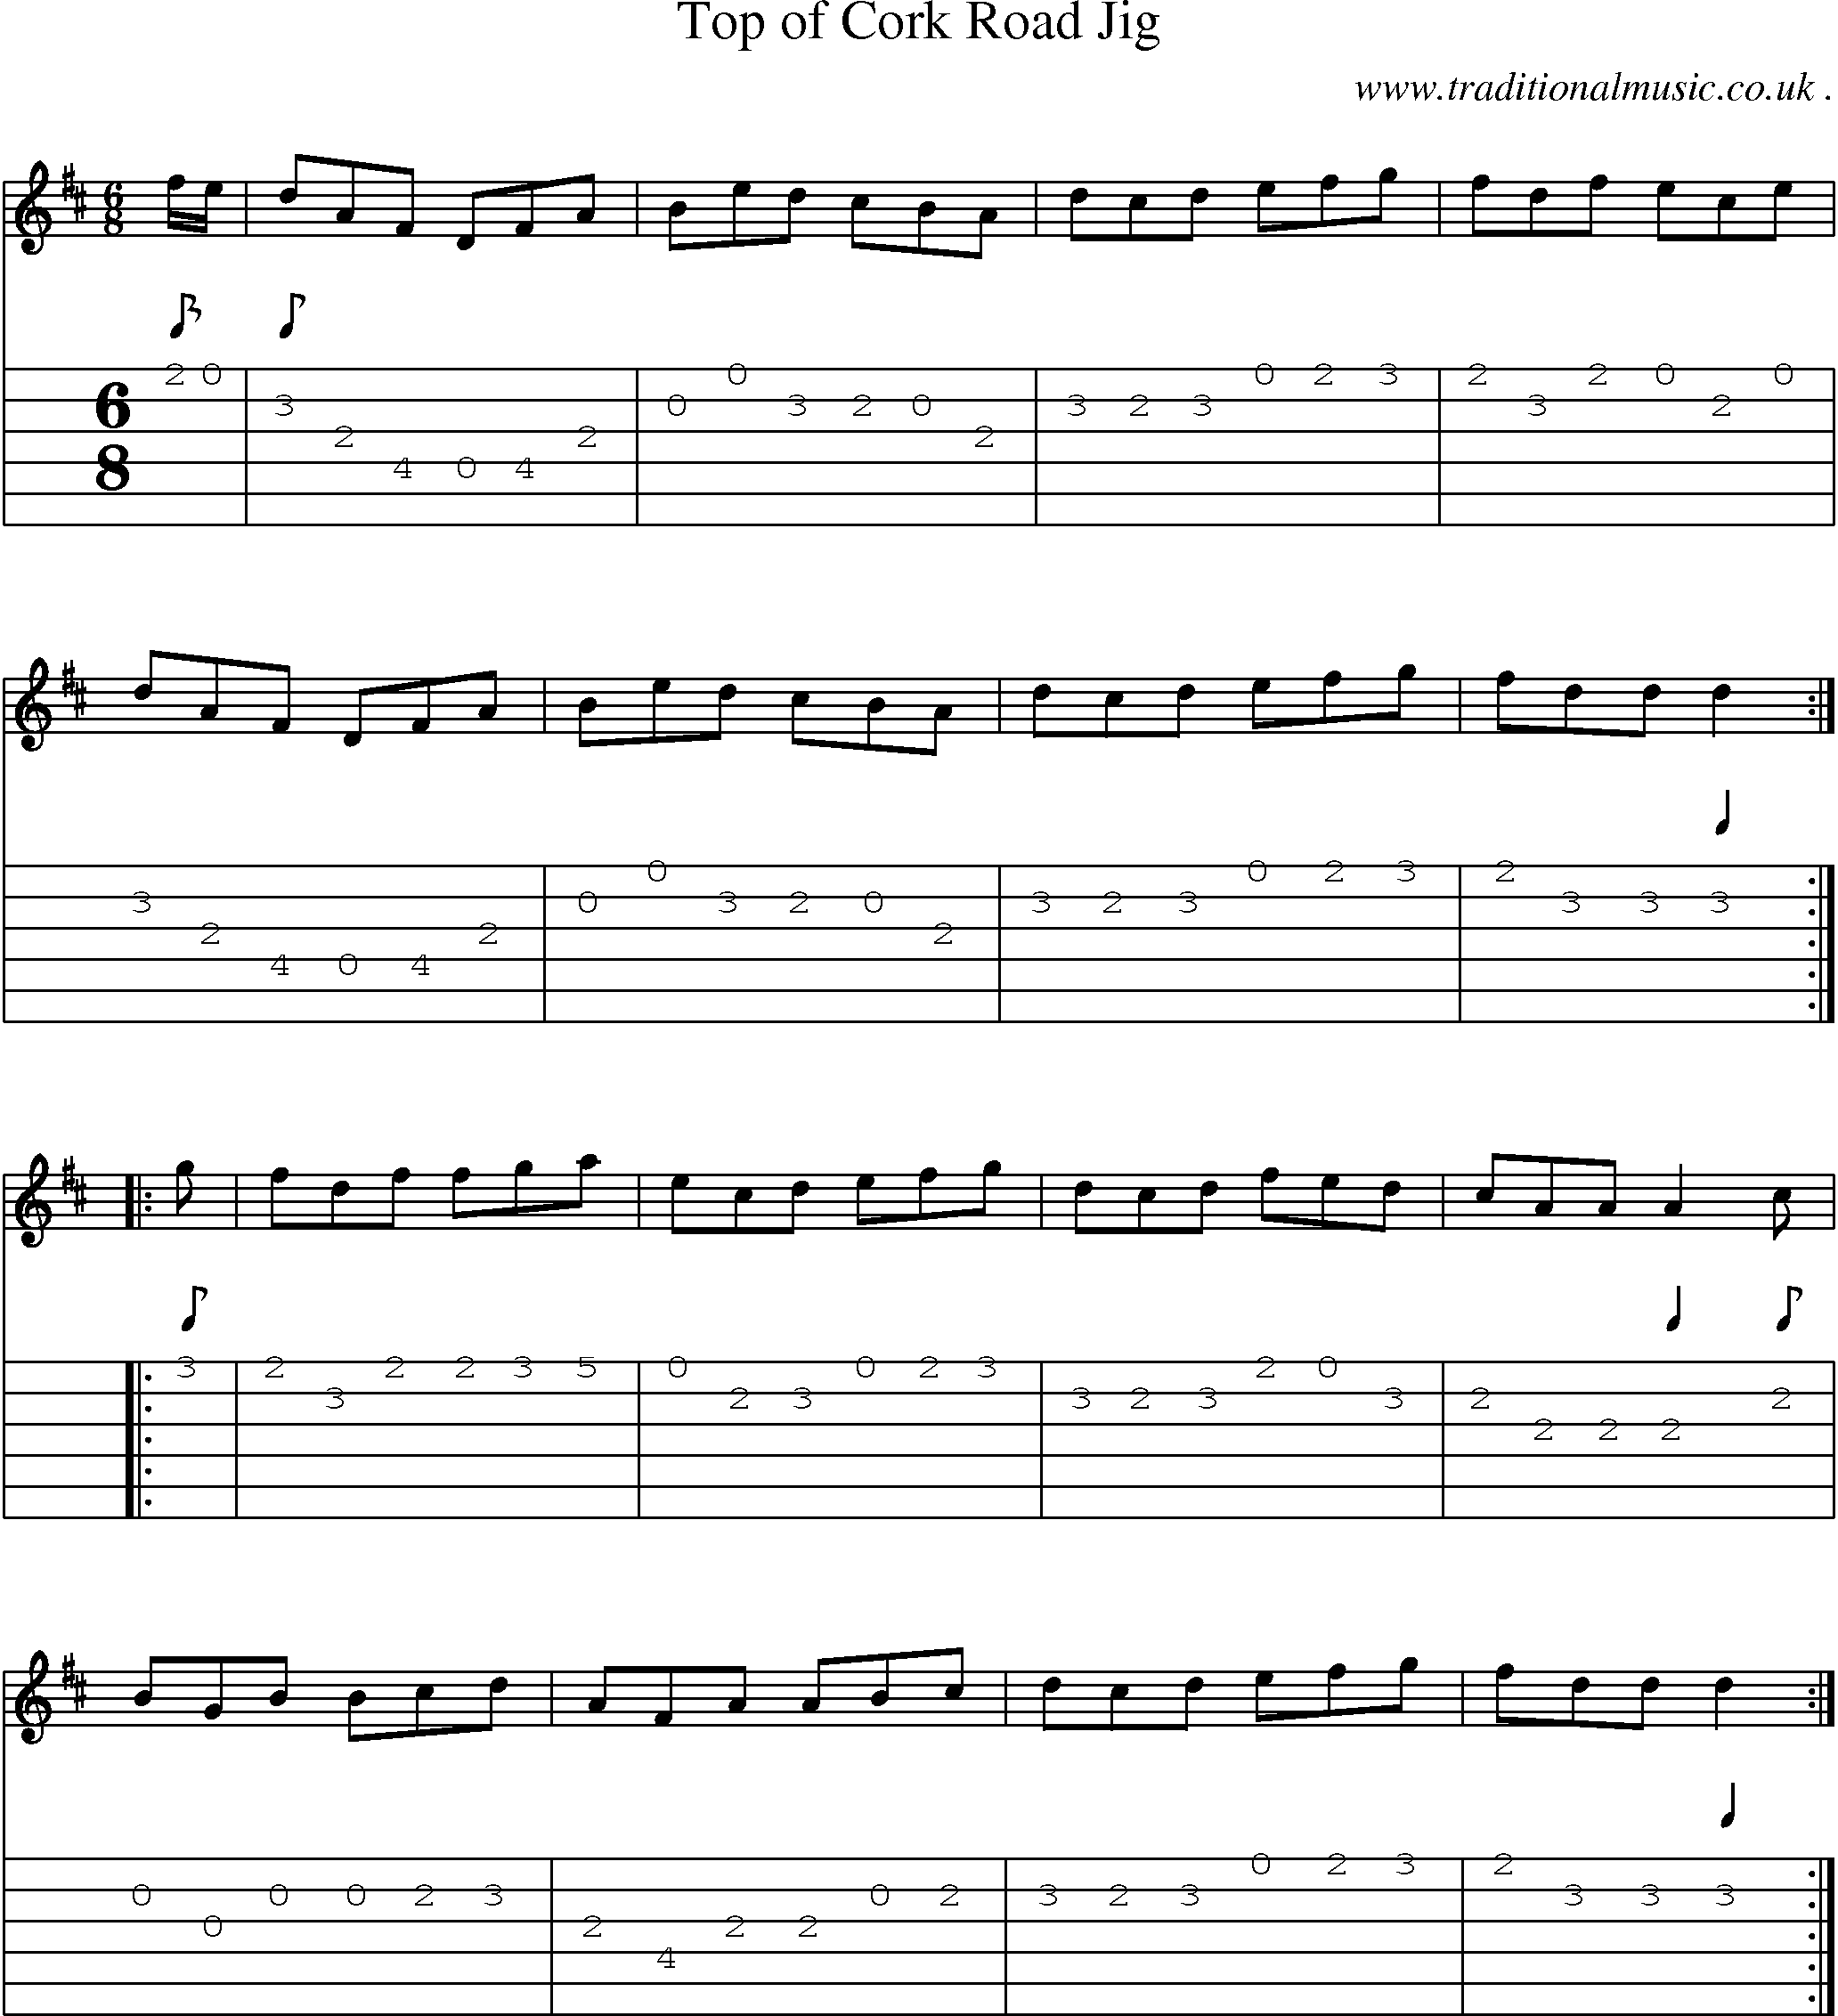 Sheet-Music and Guitar Tabs for Top Of Cork Road Jig